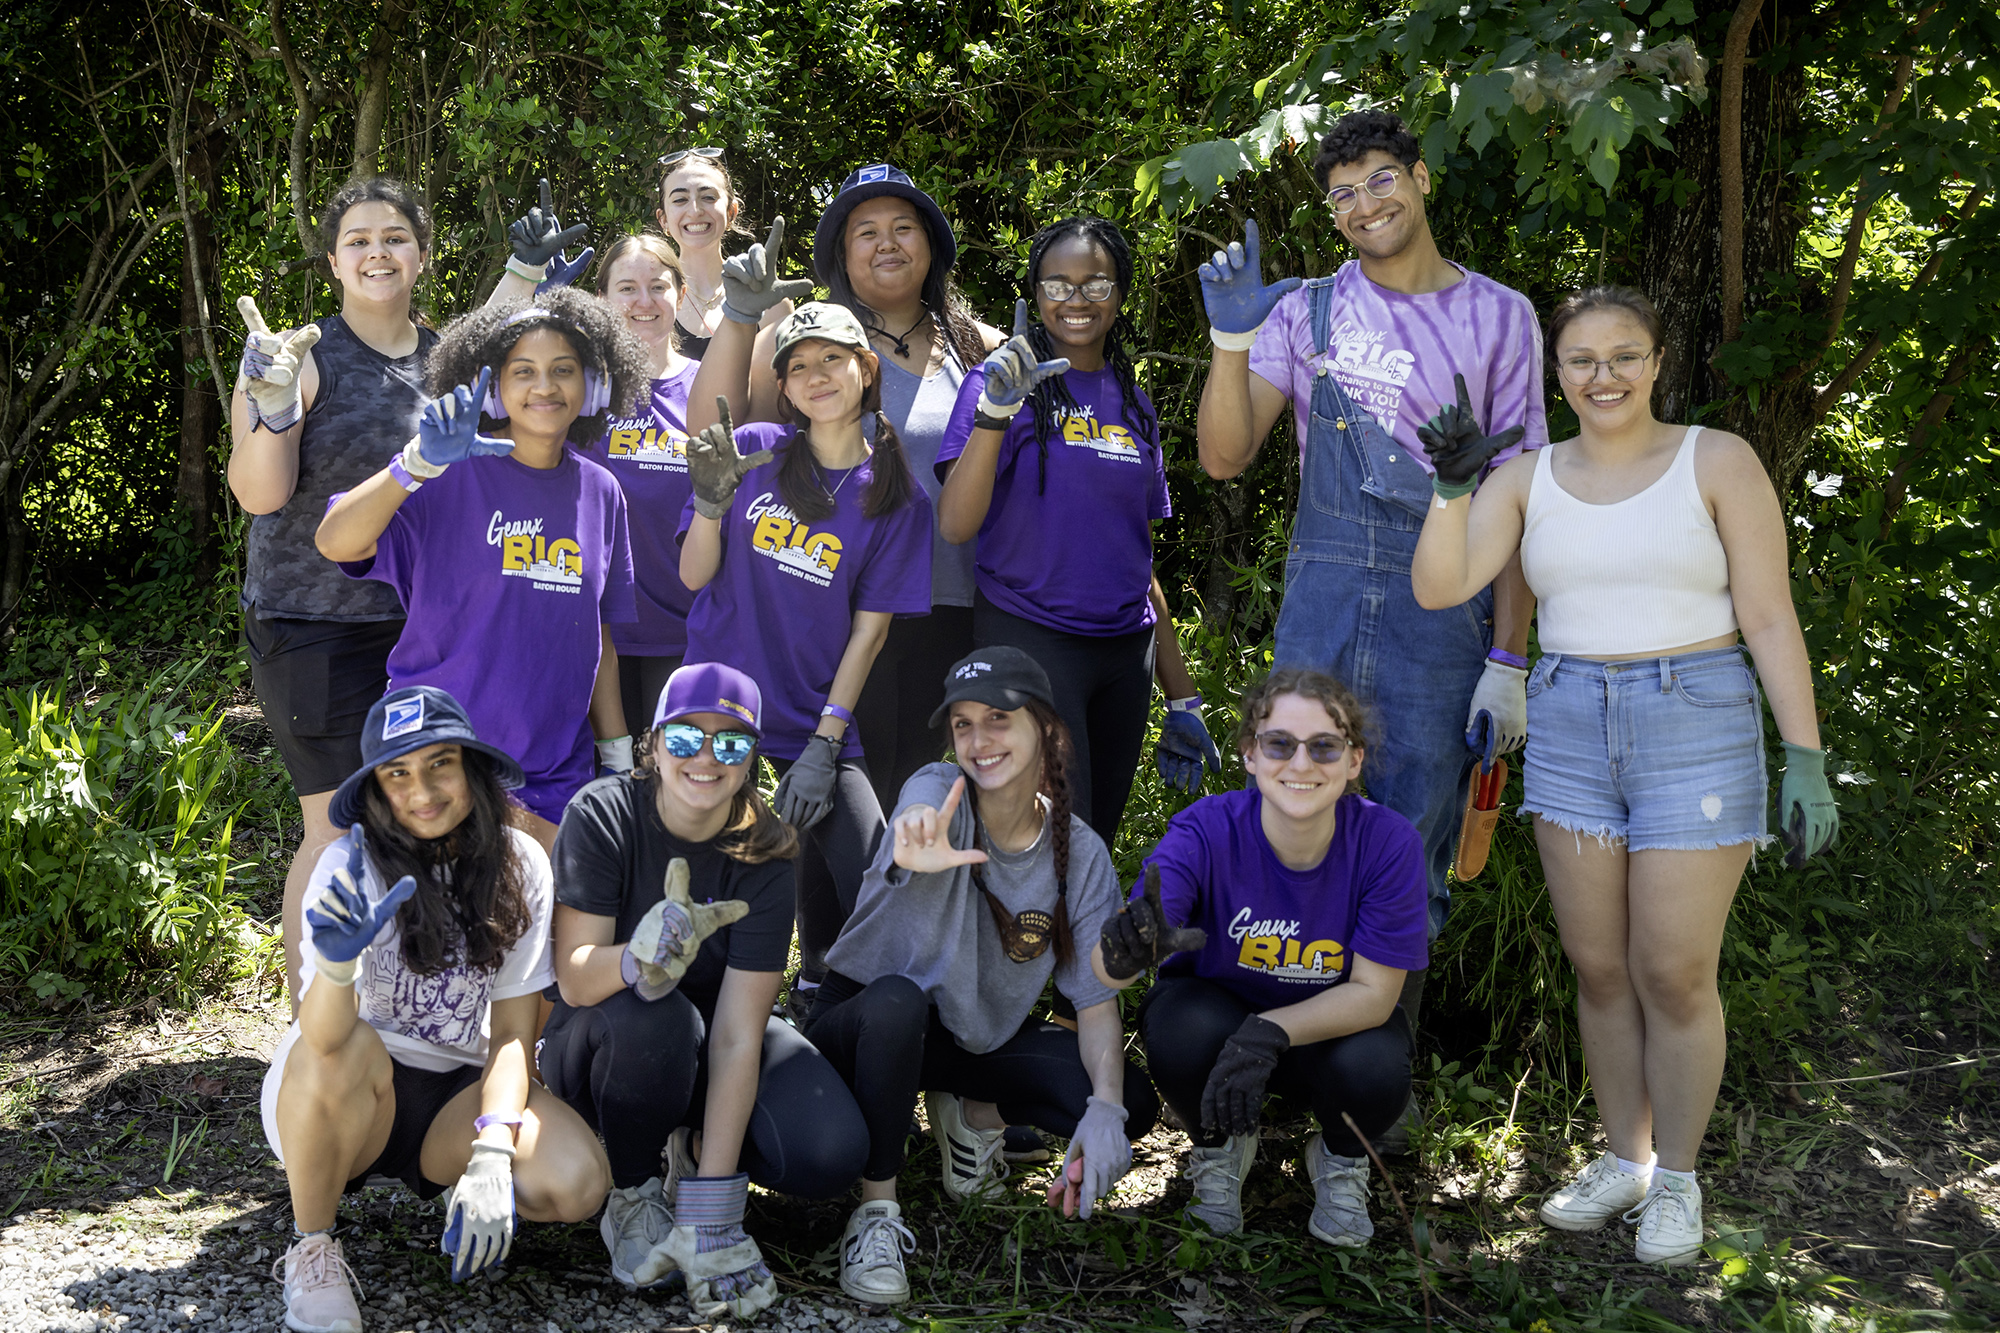 Group photo of students at Geaux Big service day